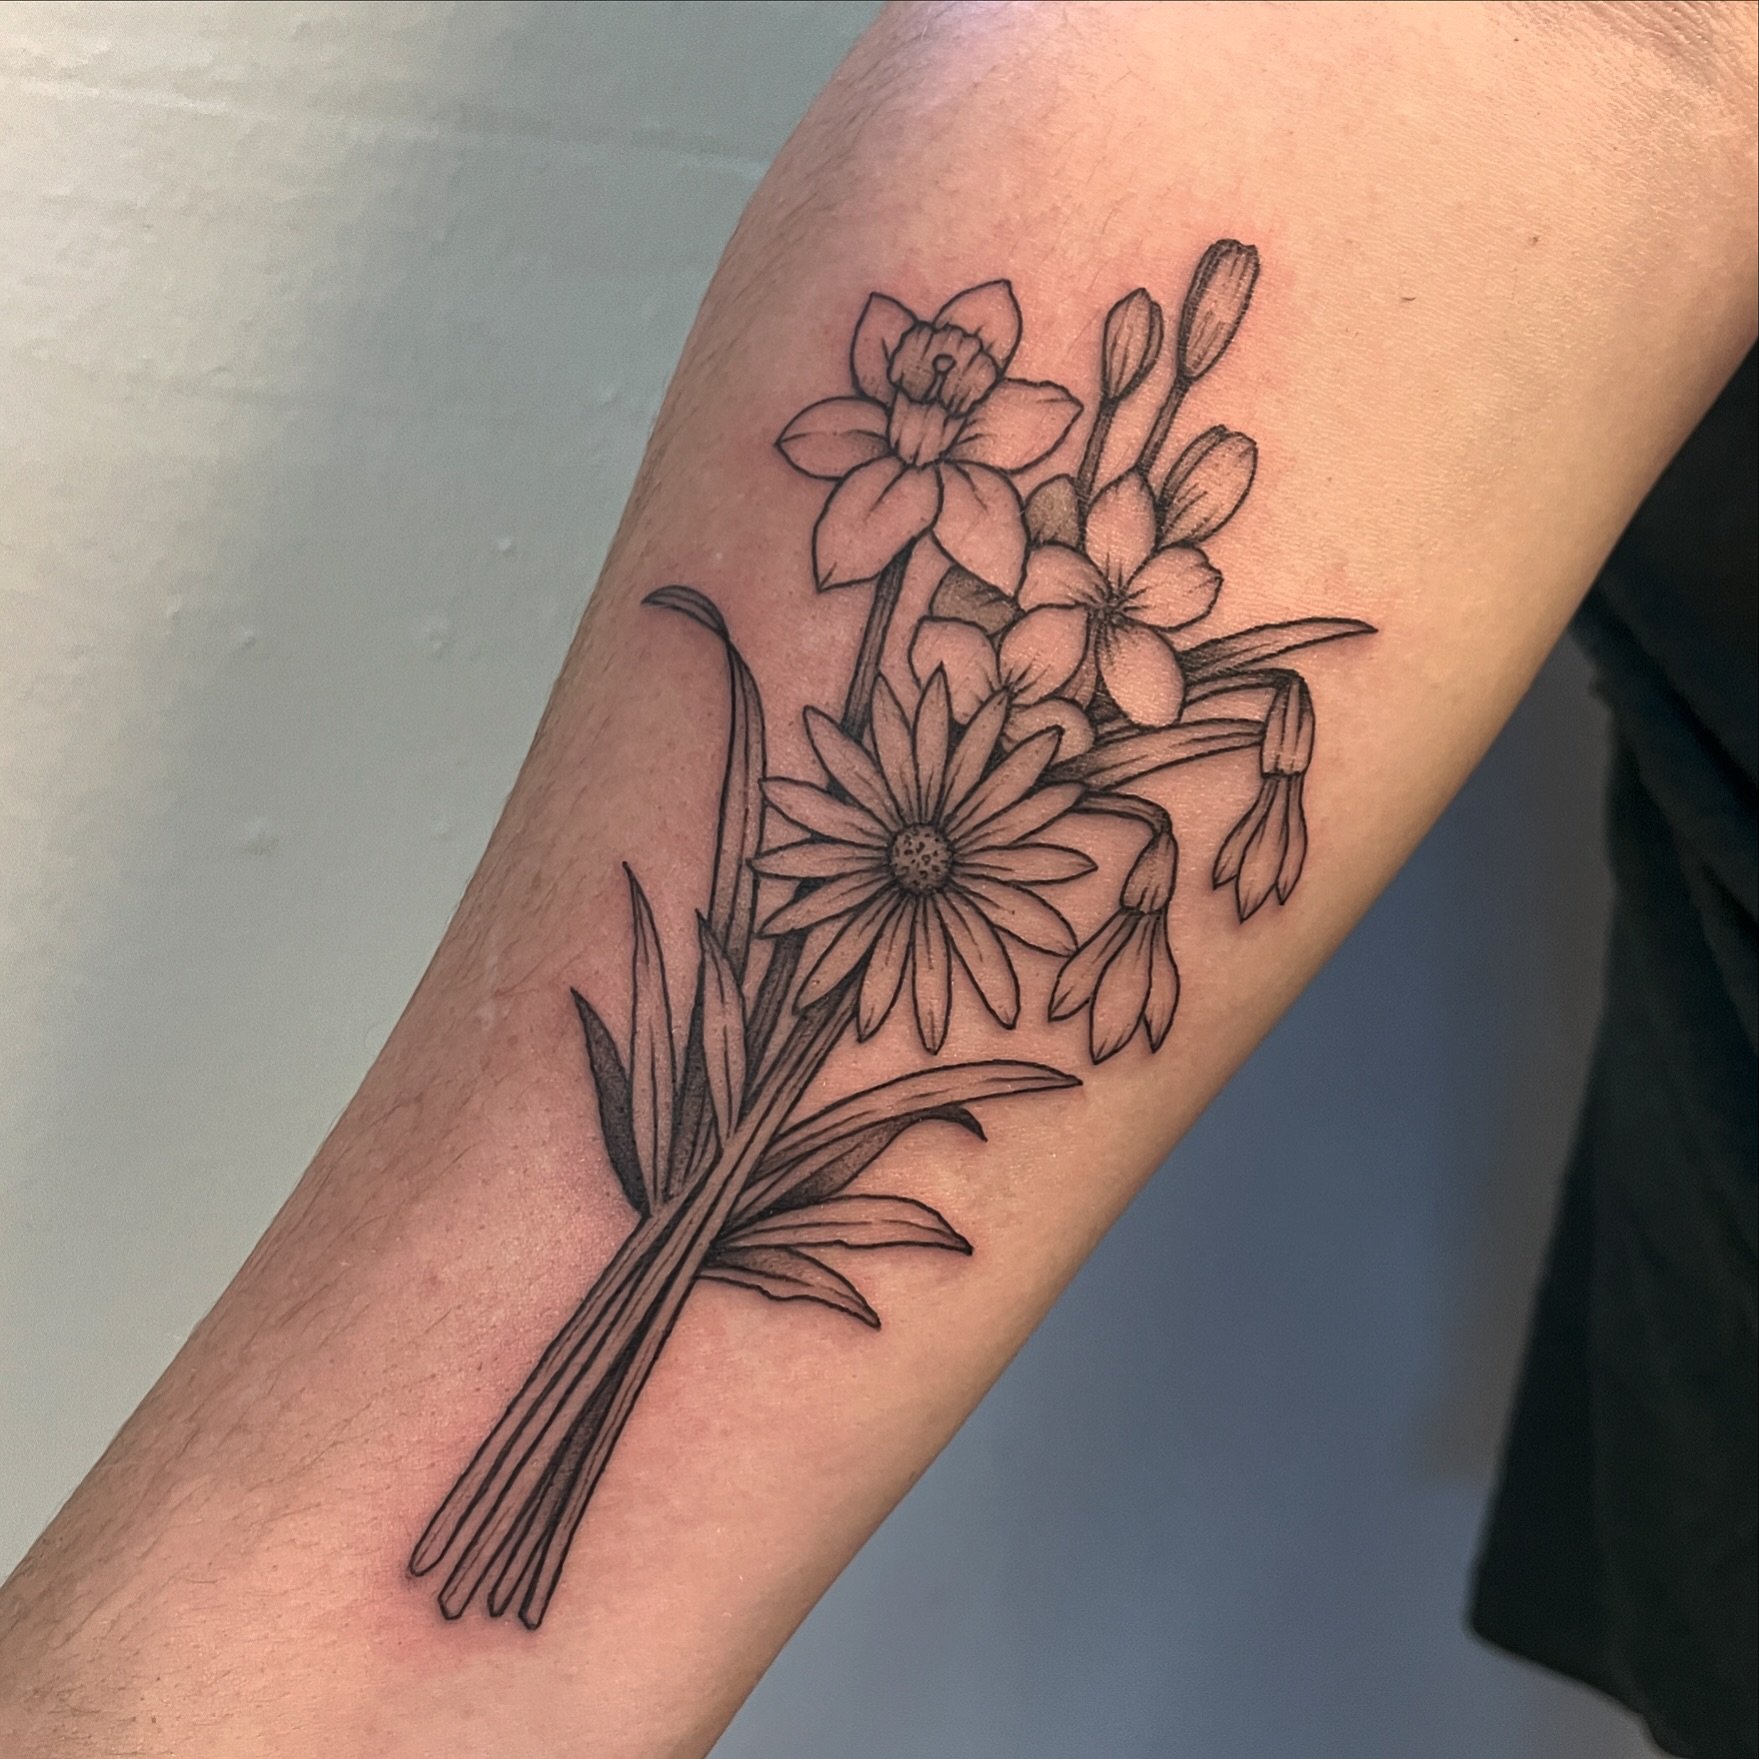 flowers for annie 💐 always a blast getting to do botanical work, thanks again for getting these done!  #flowertattoo #floraltattoo #botanicaltattoo #pdxtattoo #blackworktattoo #lineworktattoo